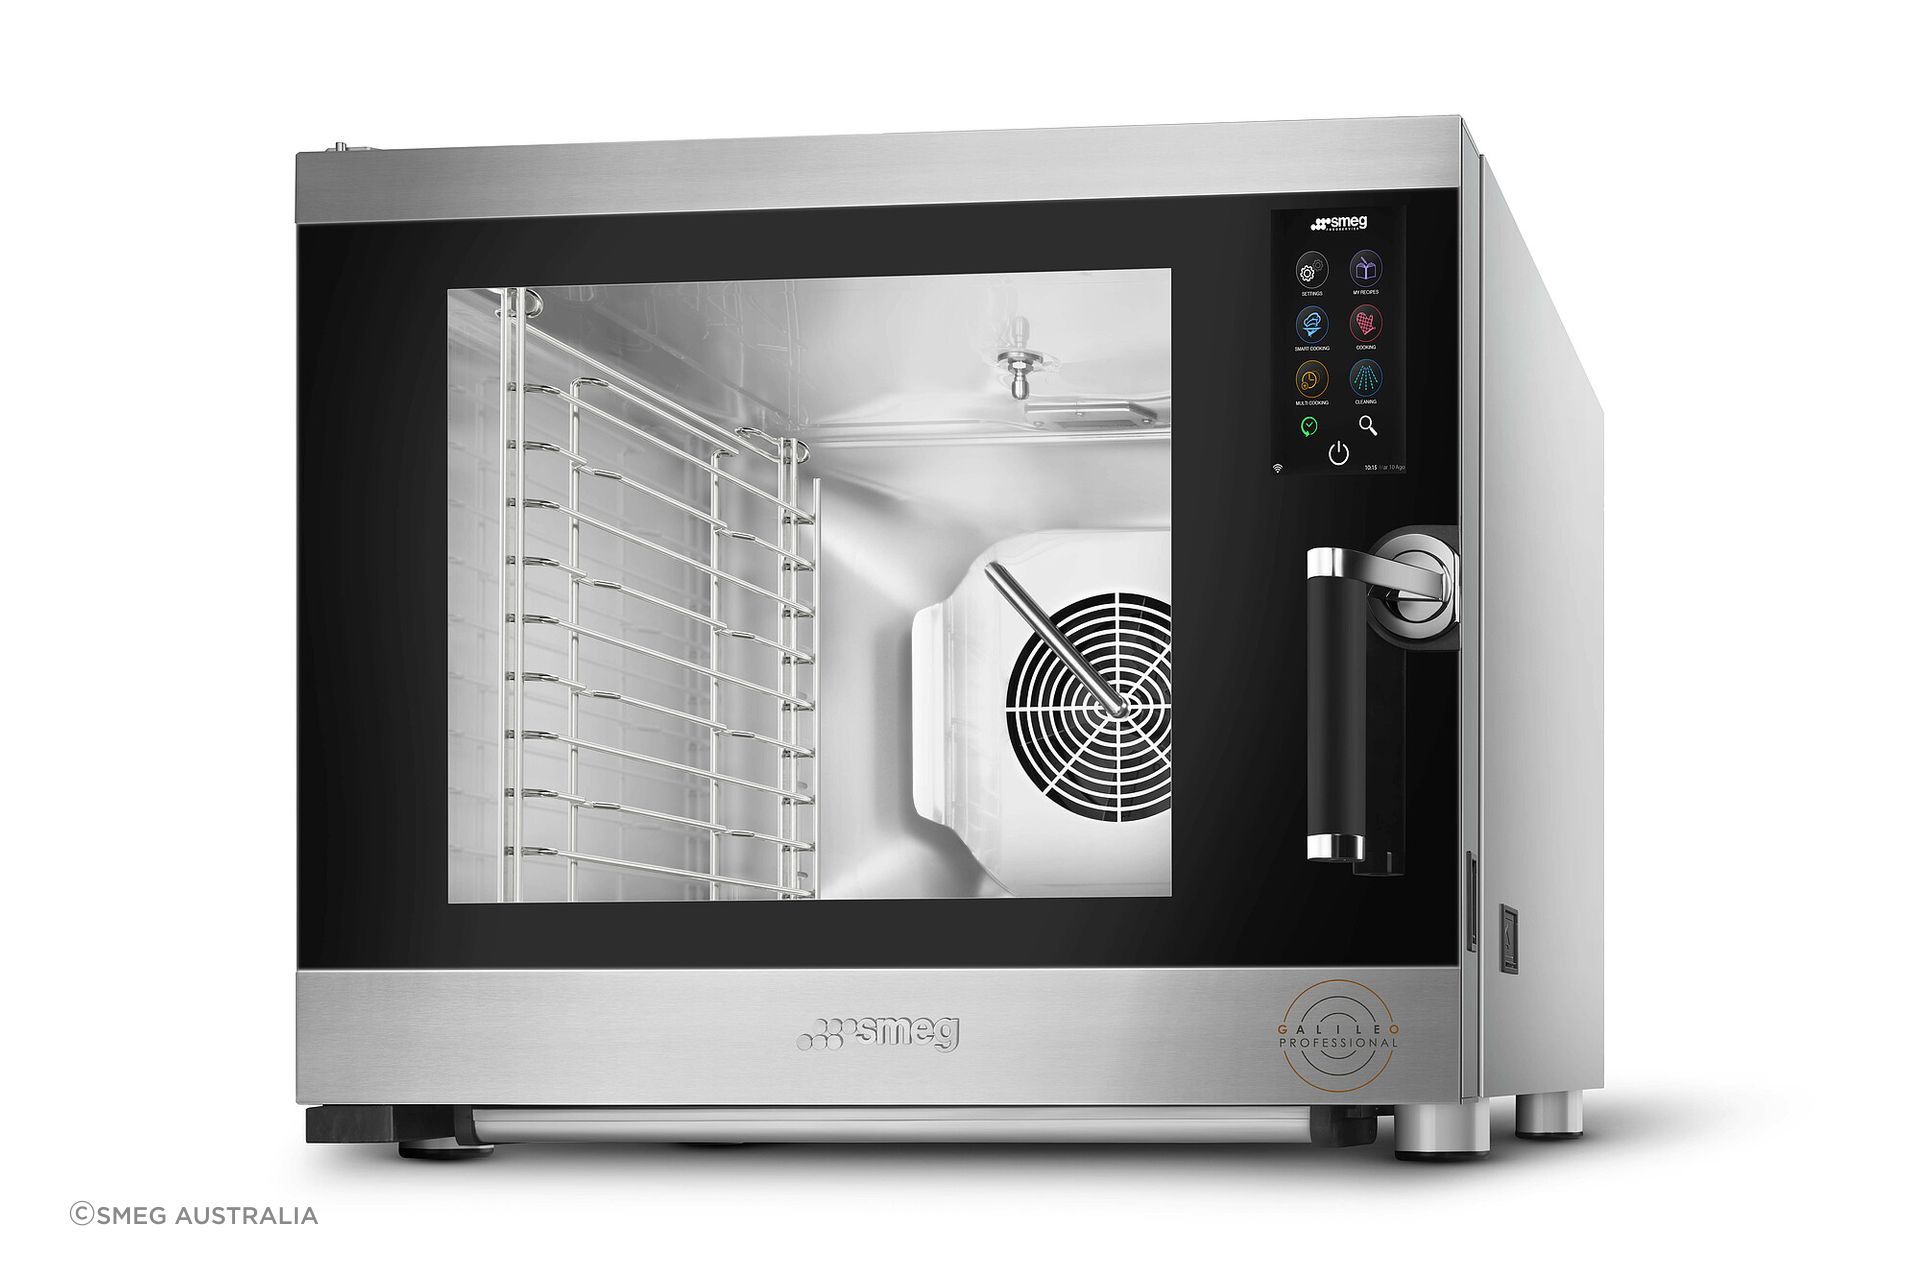 The Galileo Professional oven